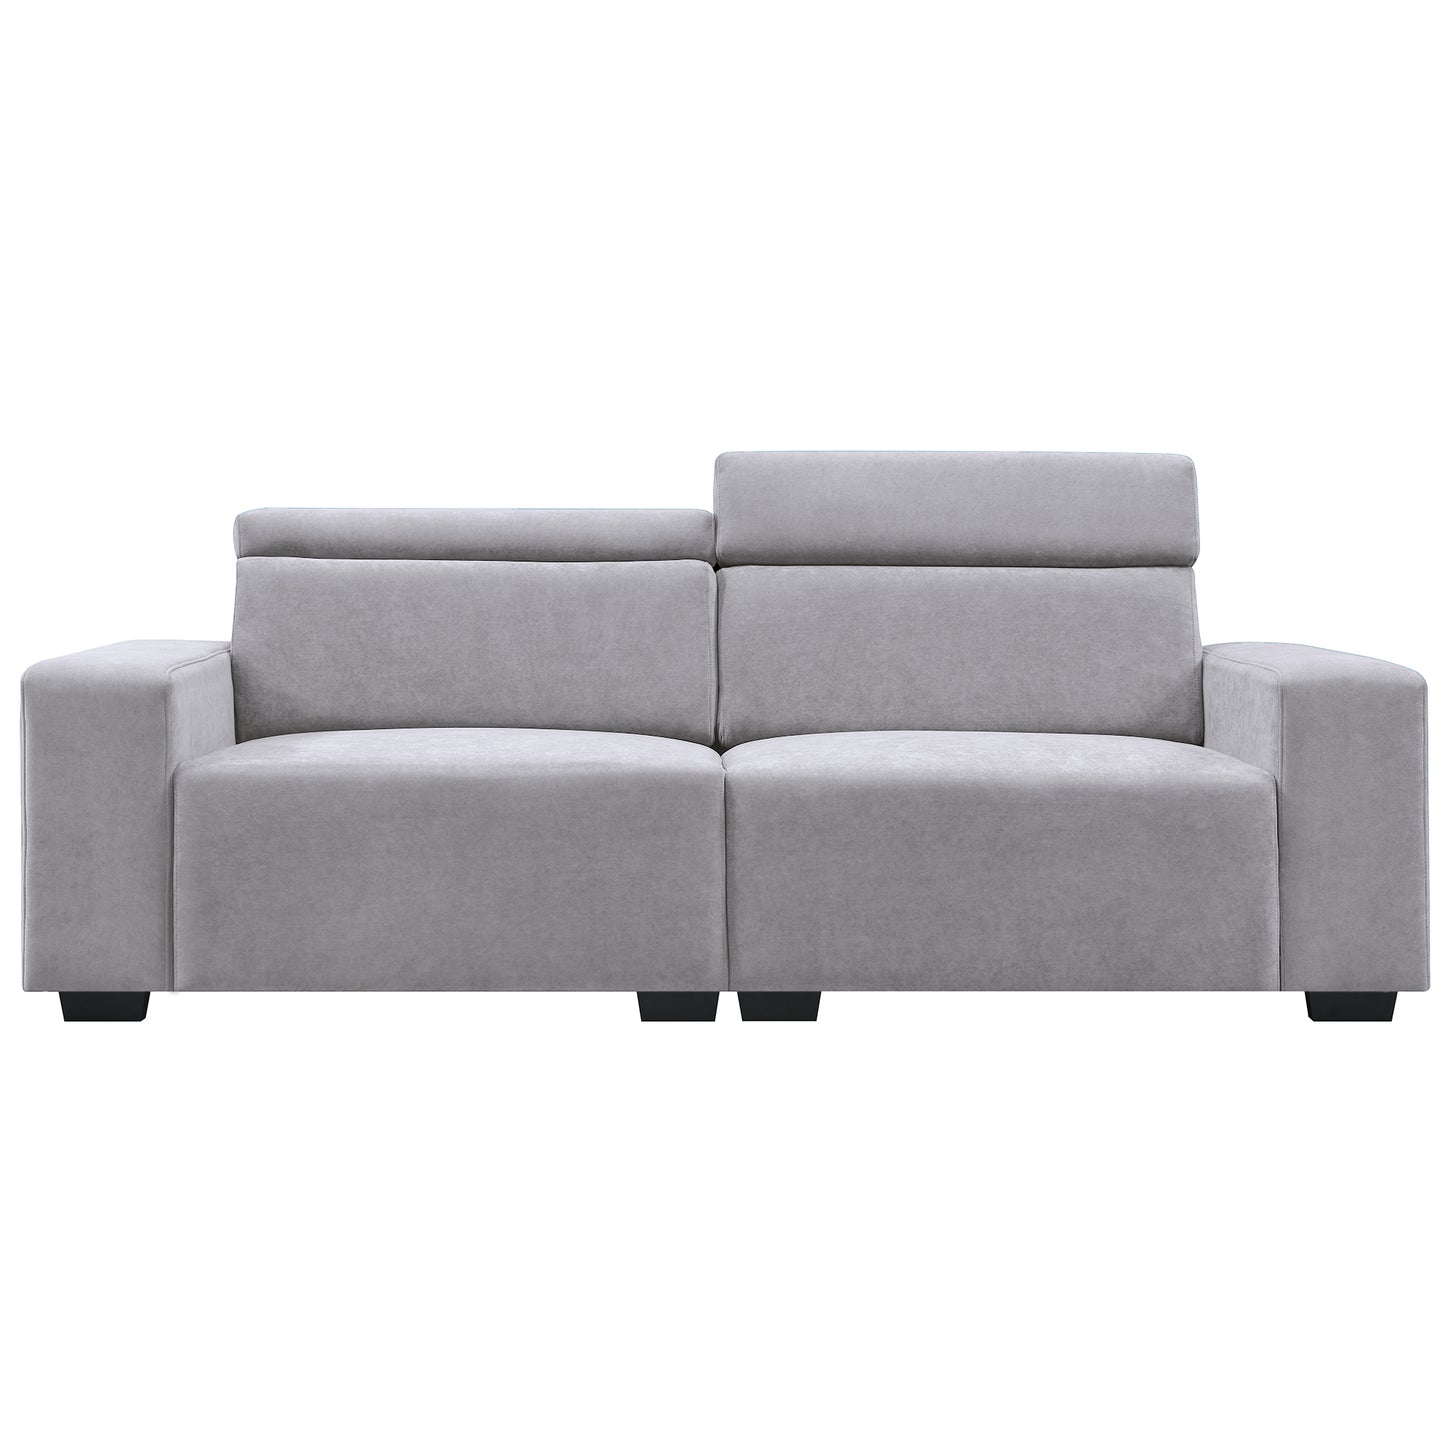 87*34.2'' 2-3 Seater Sectional Sofa Couch with Multi-Angle Adjustable Headrest,Spacious and Comfortable Velvet Loveseat for Living Room,Studios,Salon,, Office,Apartment,3 Colors